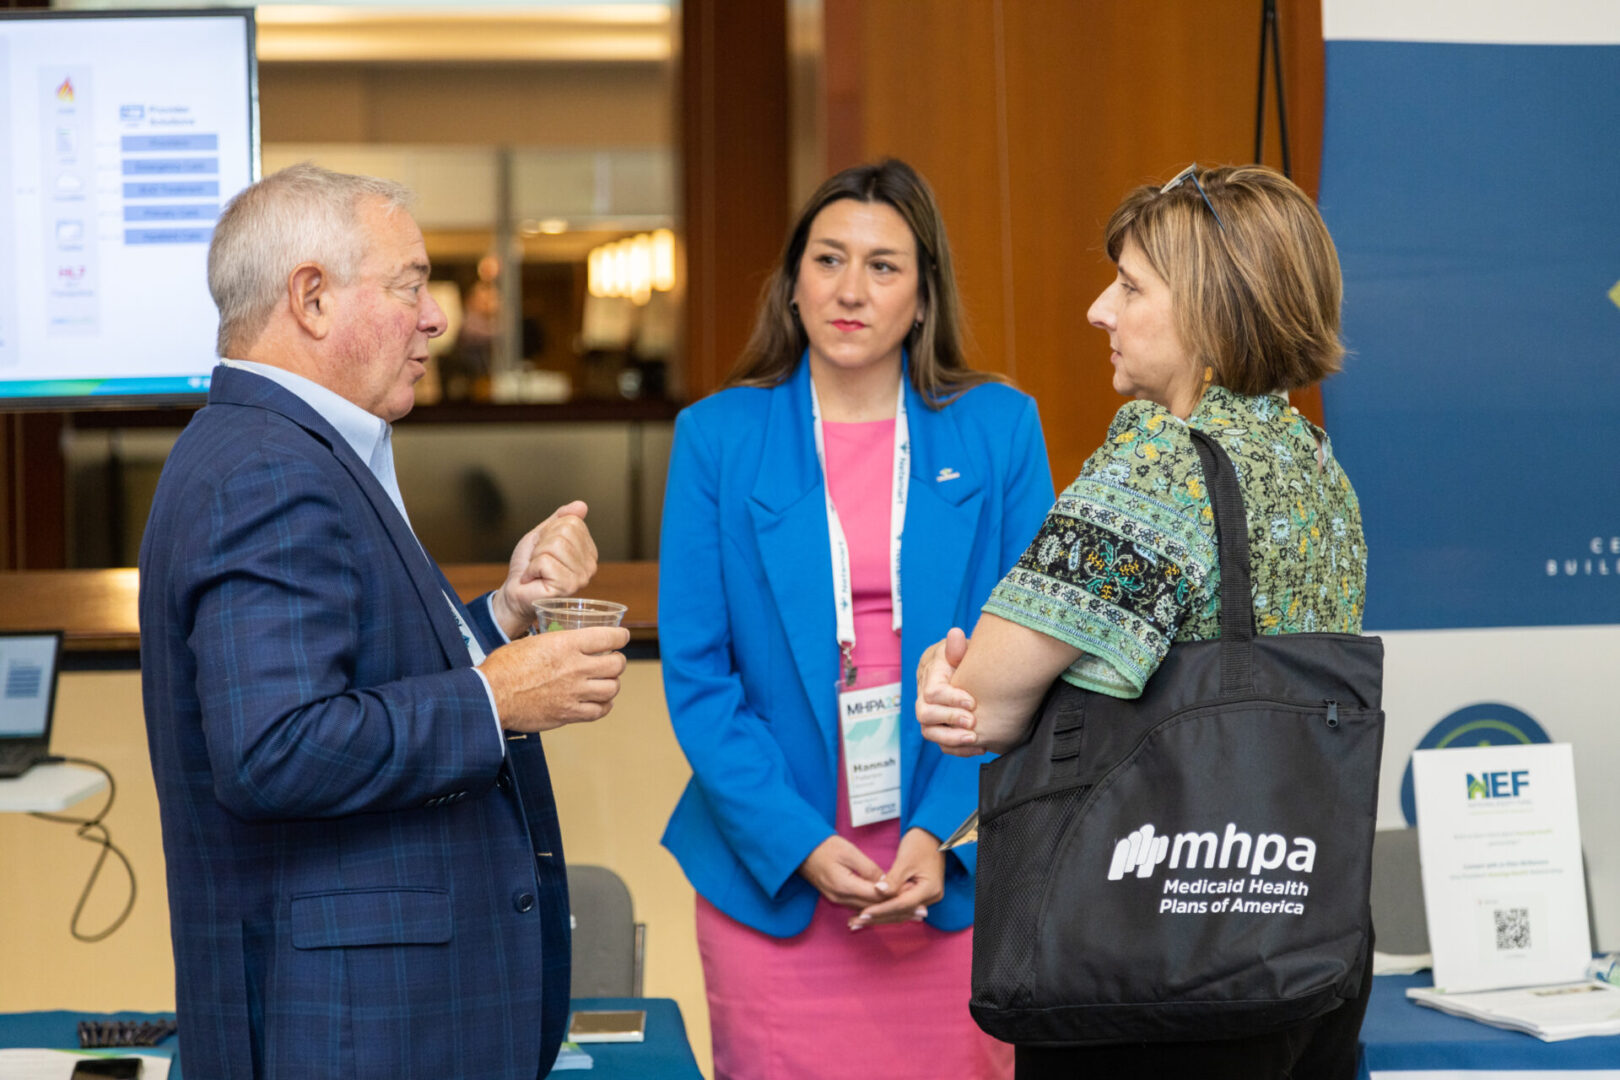 MHPA Attendees